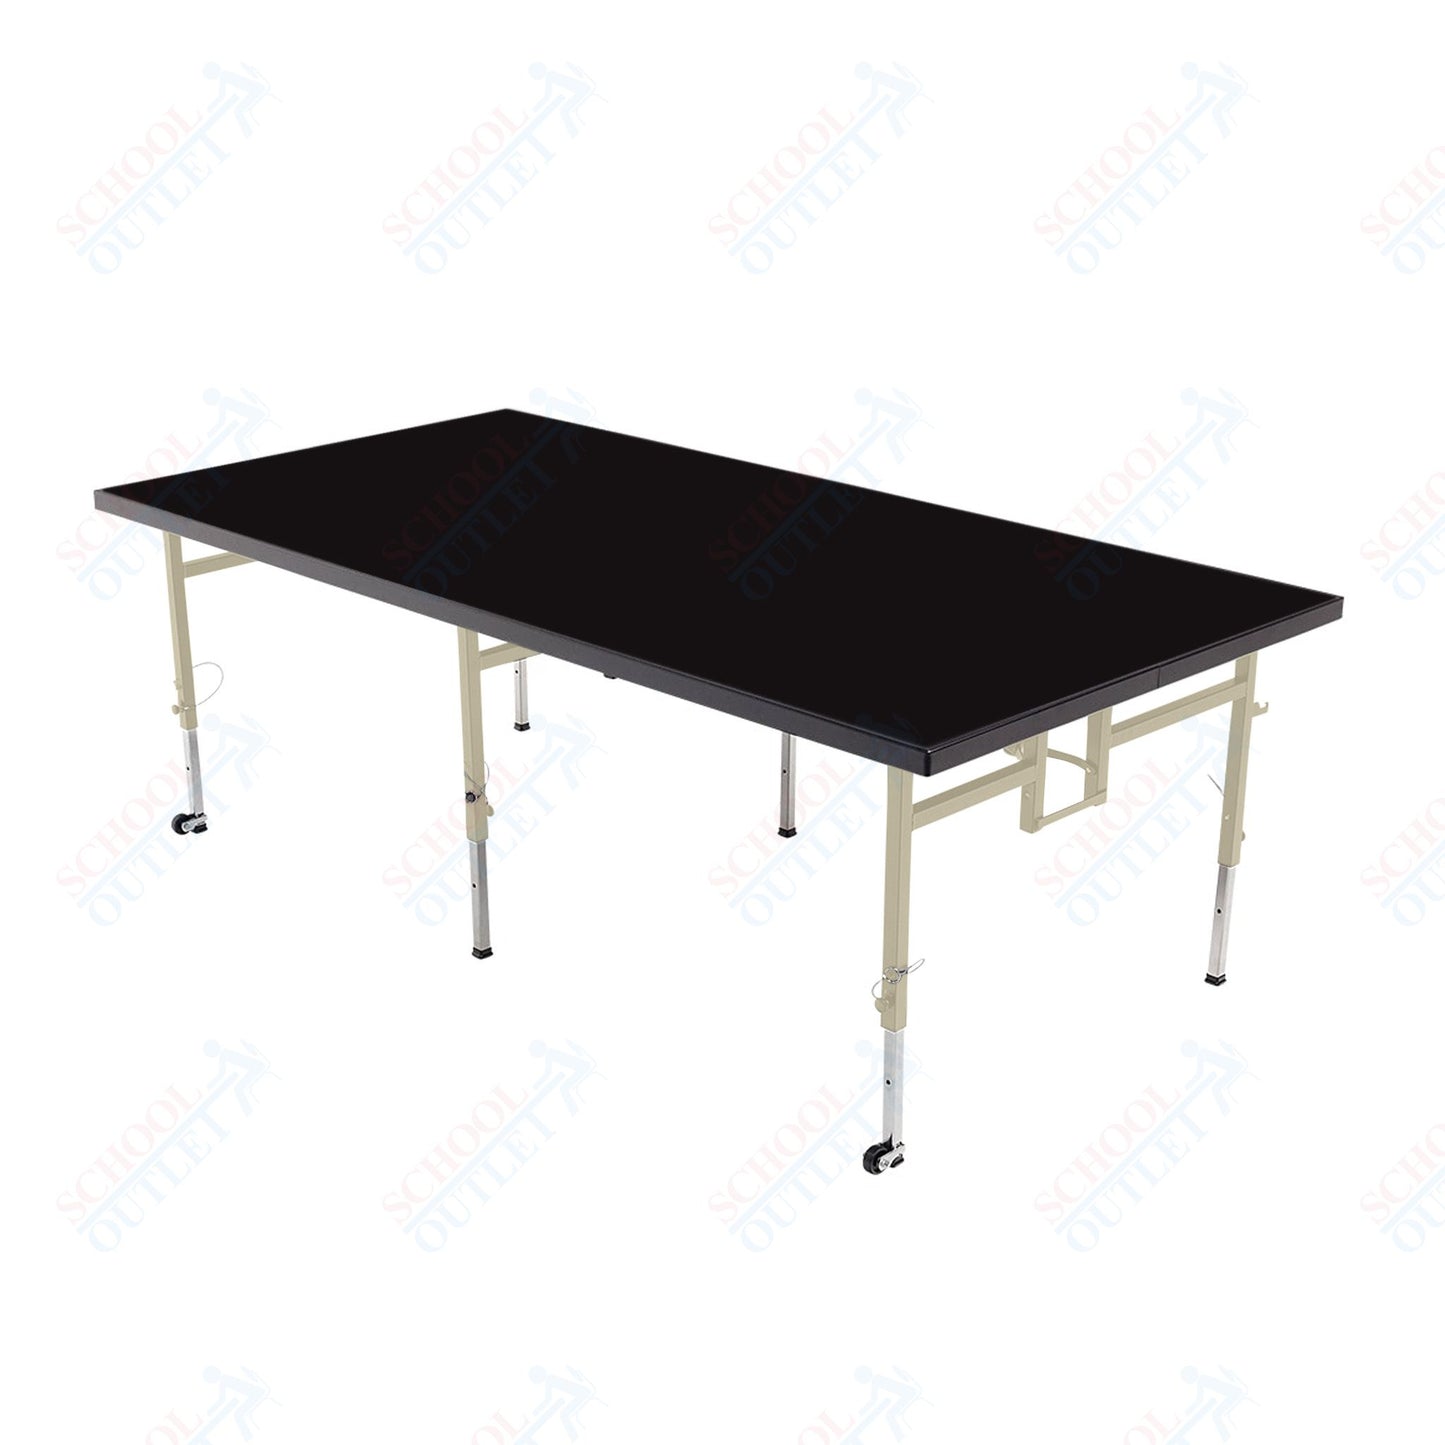 AmTab Adjustable Height Stage - Polypropylene Top - 36"W x 96"L x Adjustable 24" to 32"H  (AmTab AMT-STA3824P)